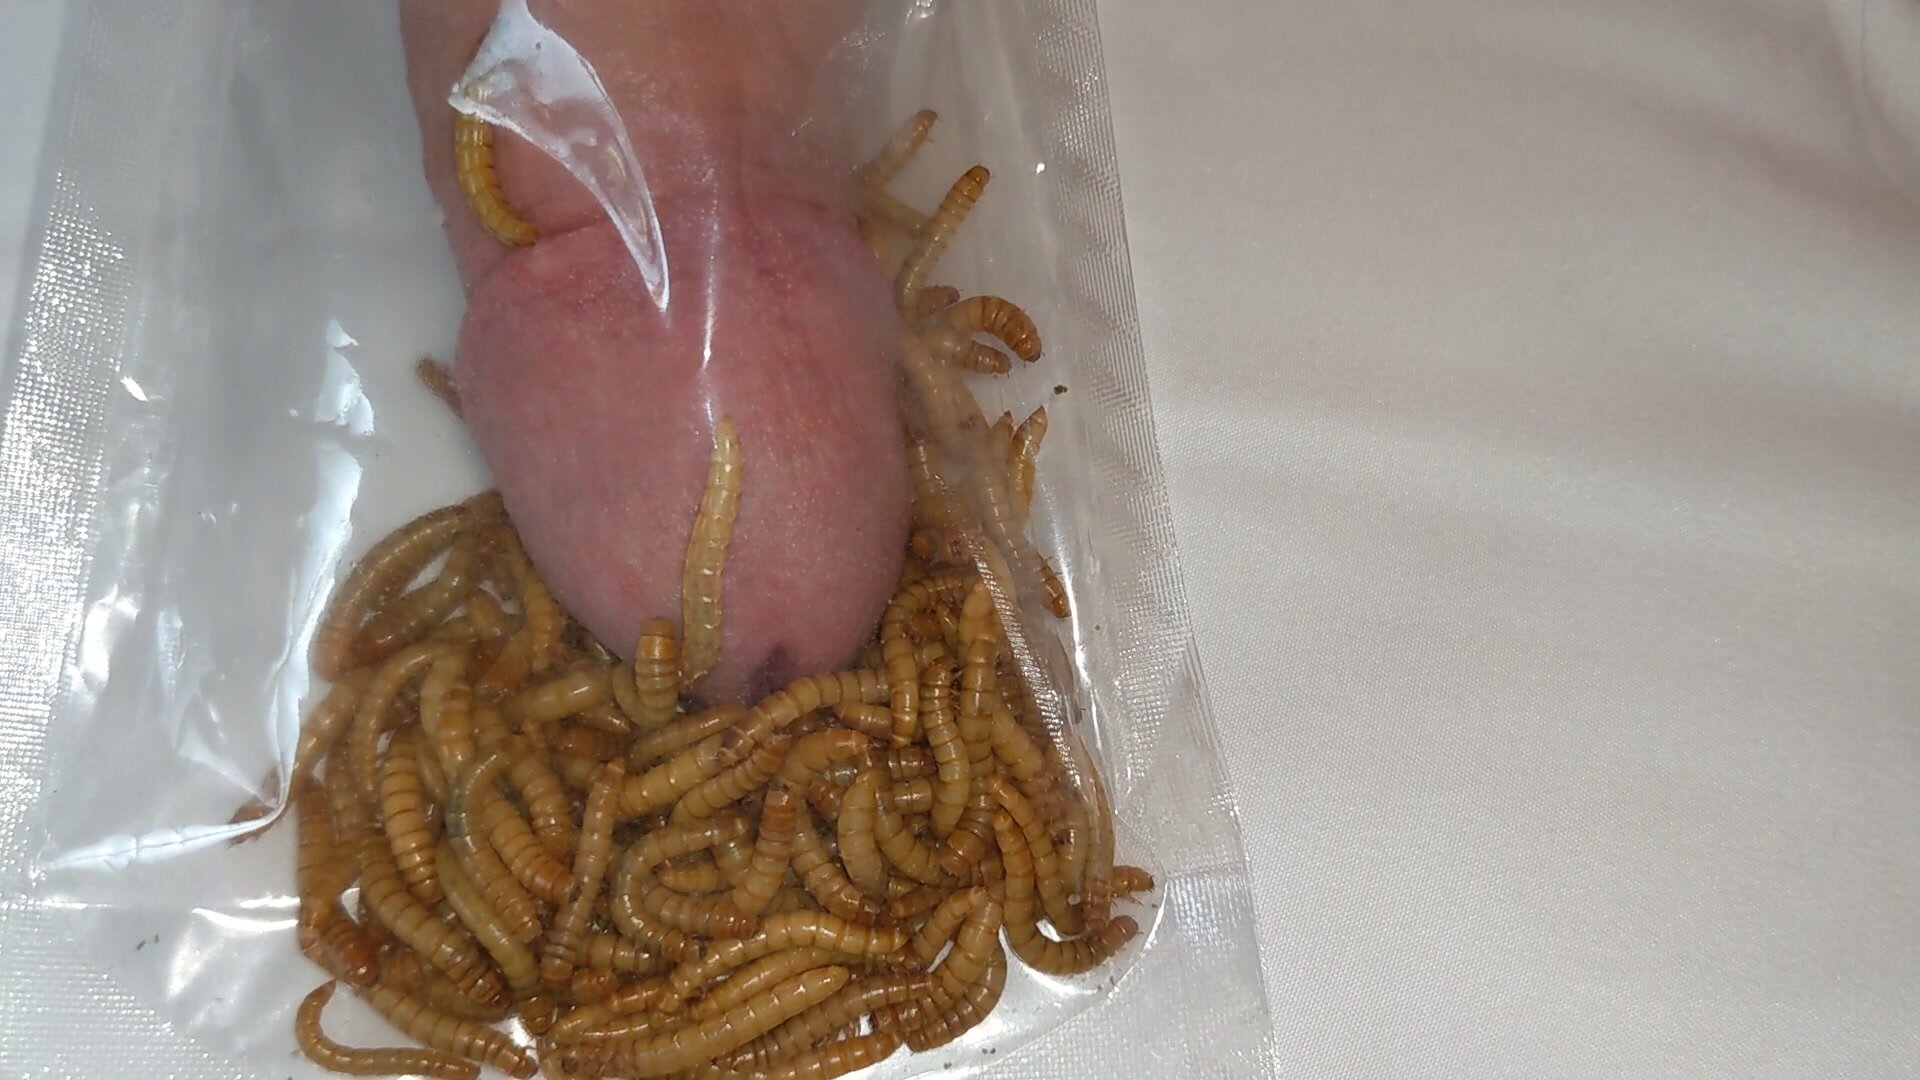 Mealworm cock ...